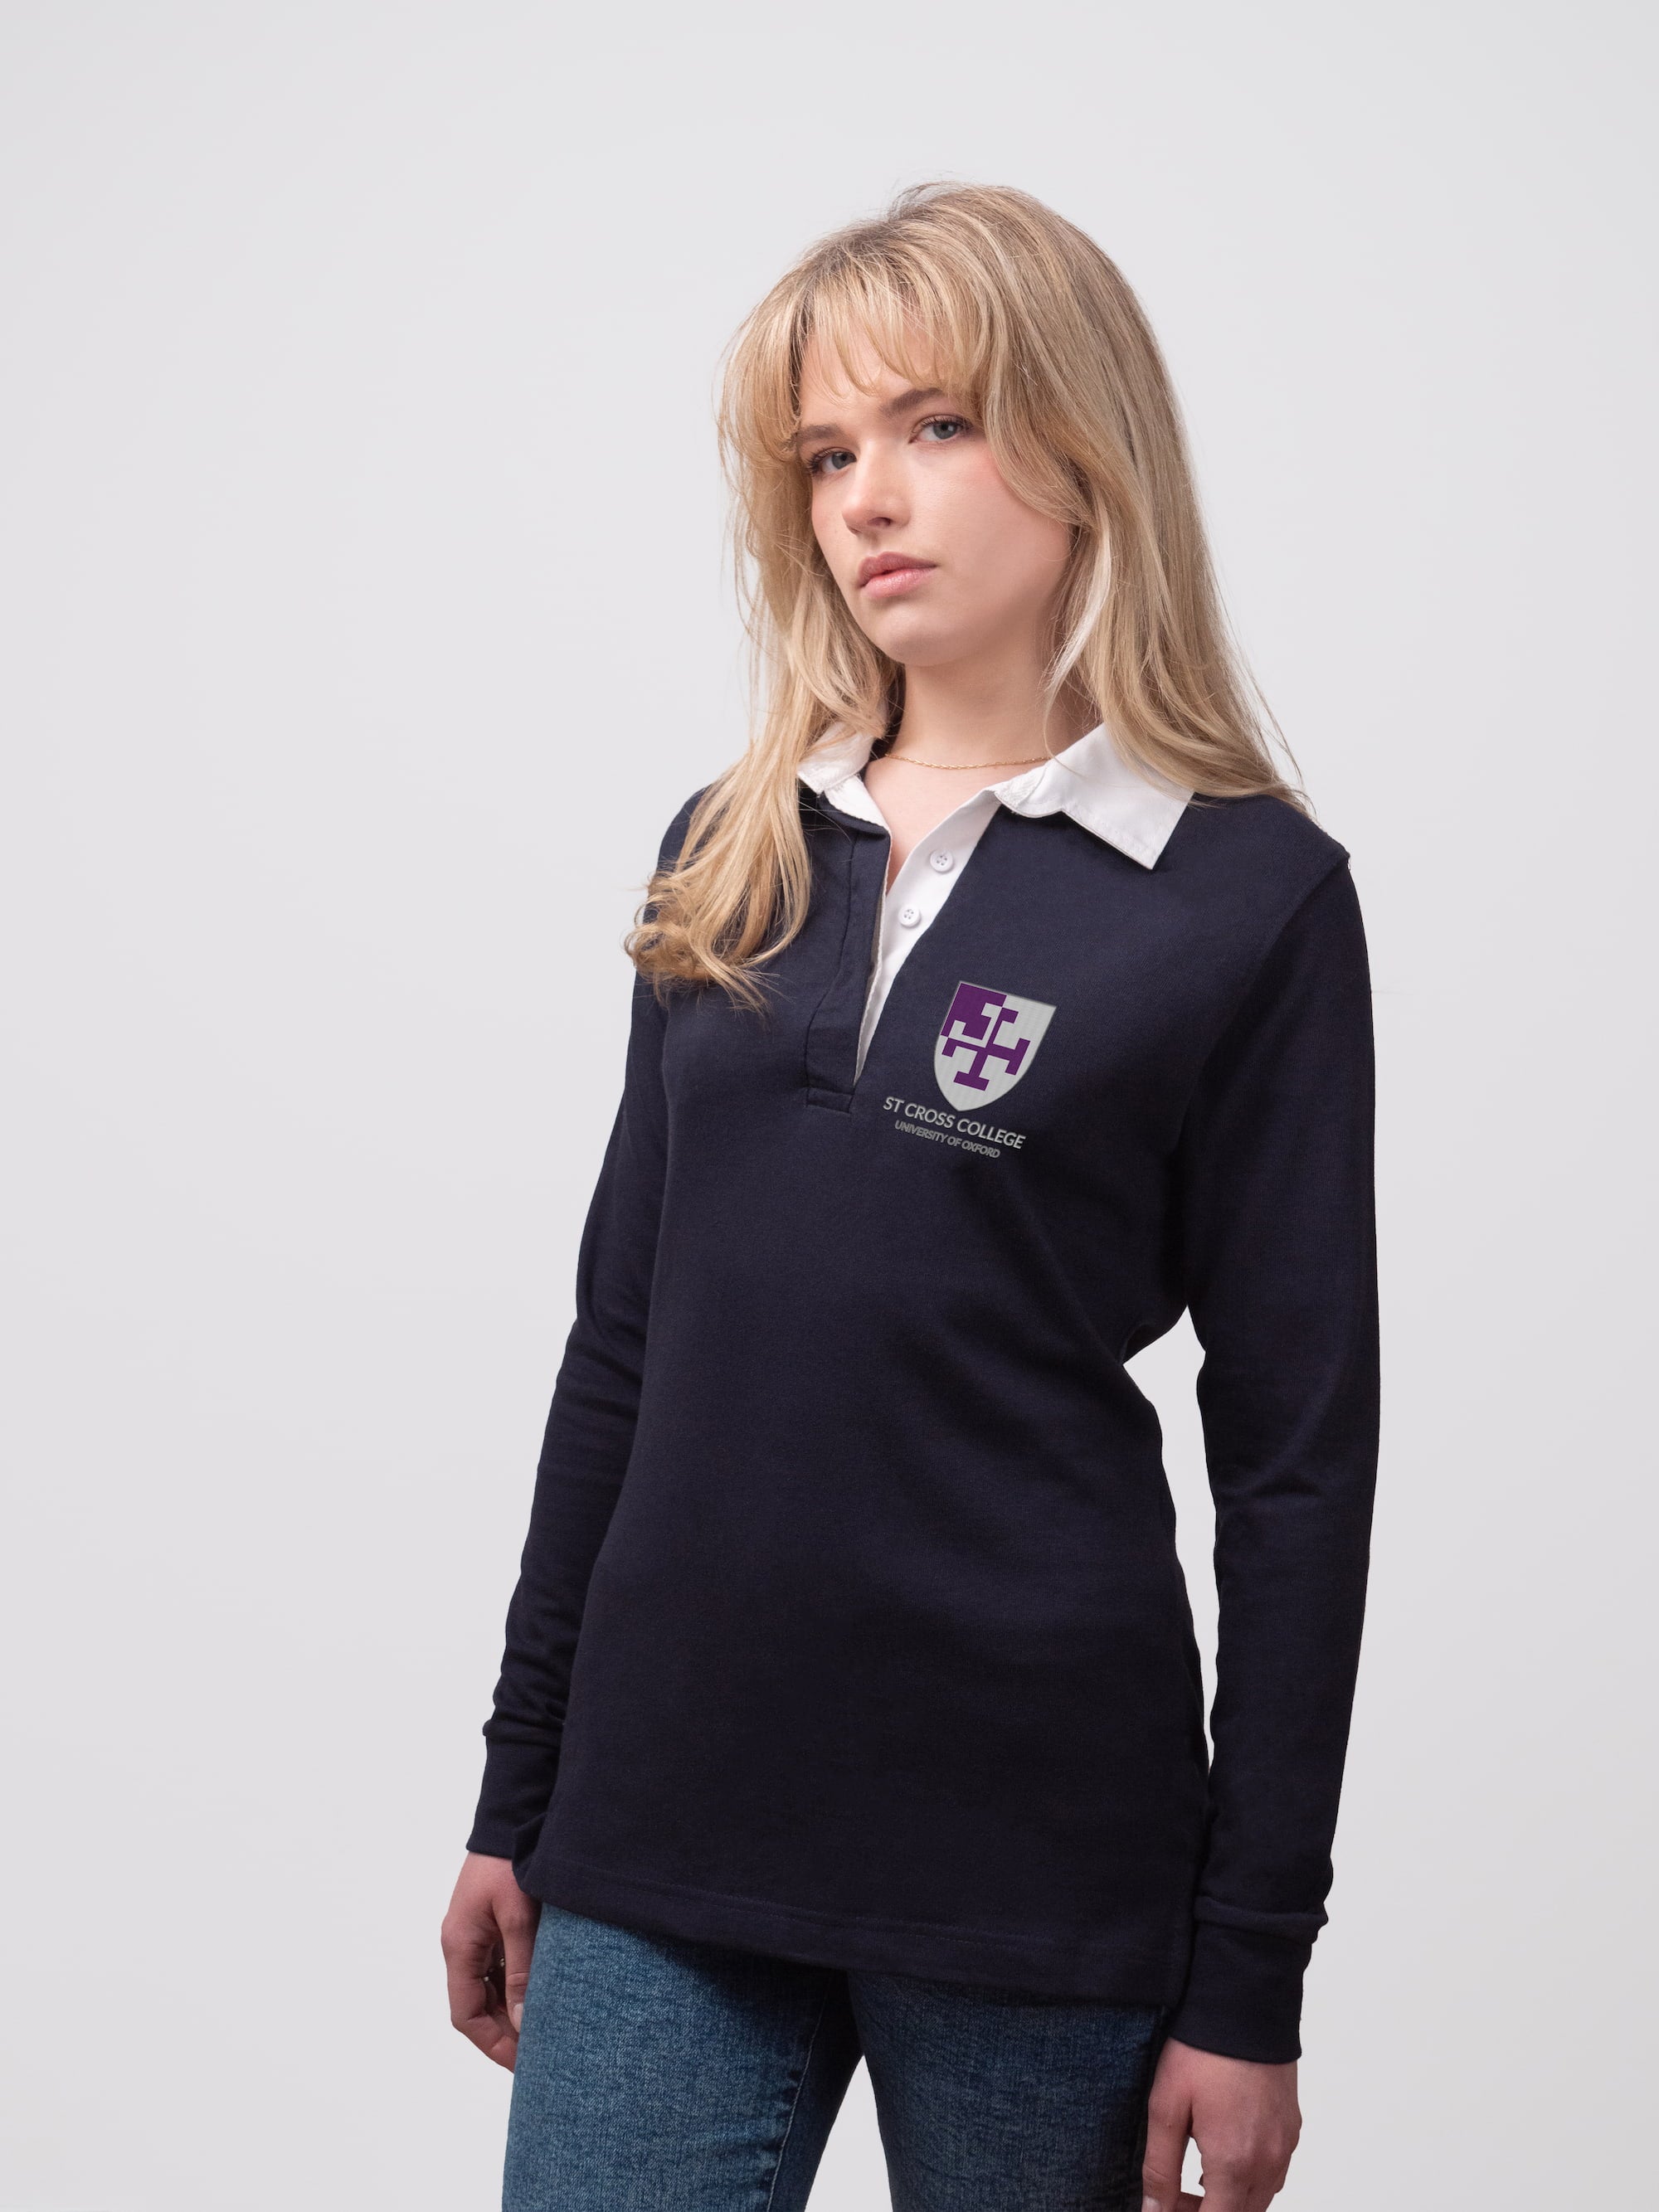 Student wearing a navy St Cross College rugby shirt with embroidered crest